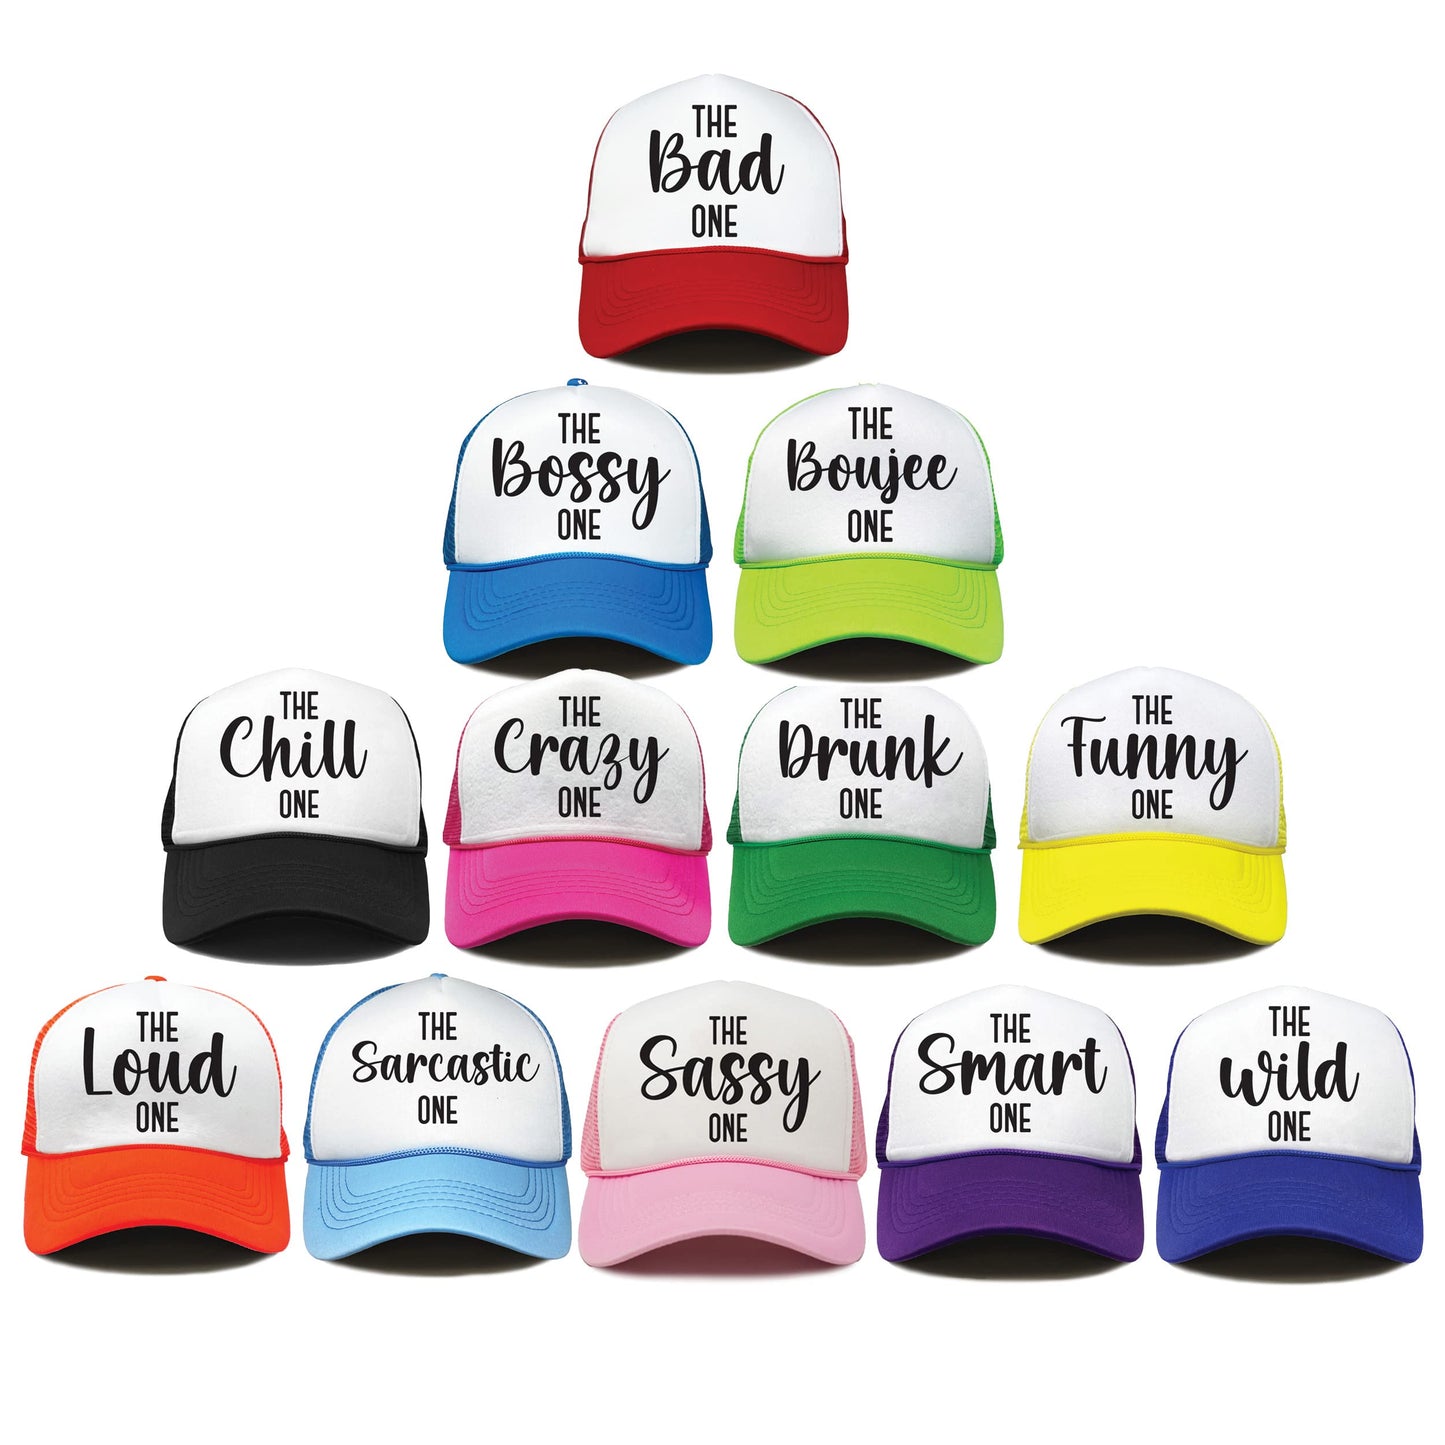 The One Party Trucker Hats by Funky Junque